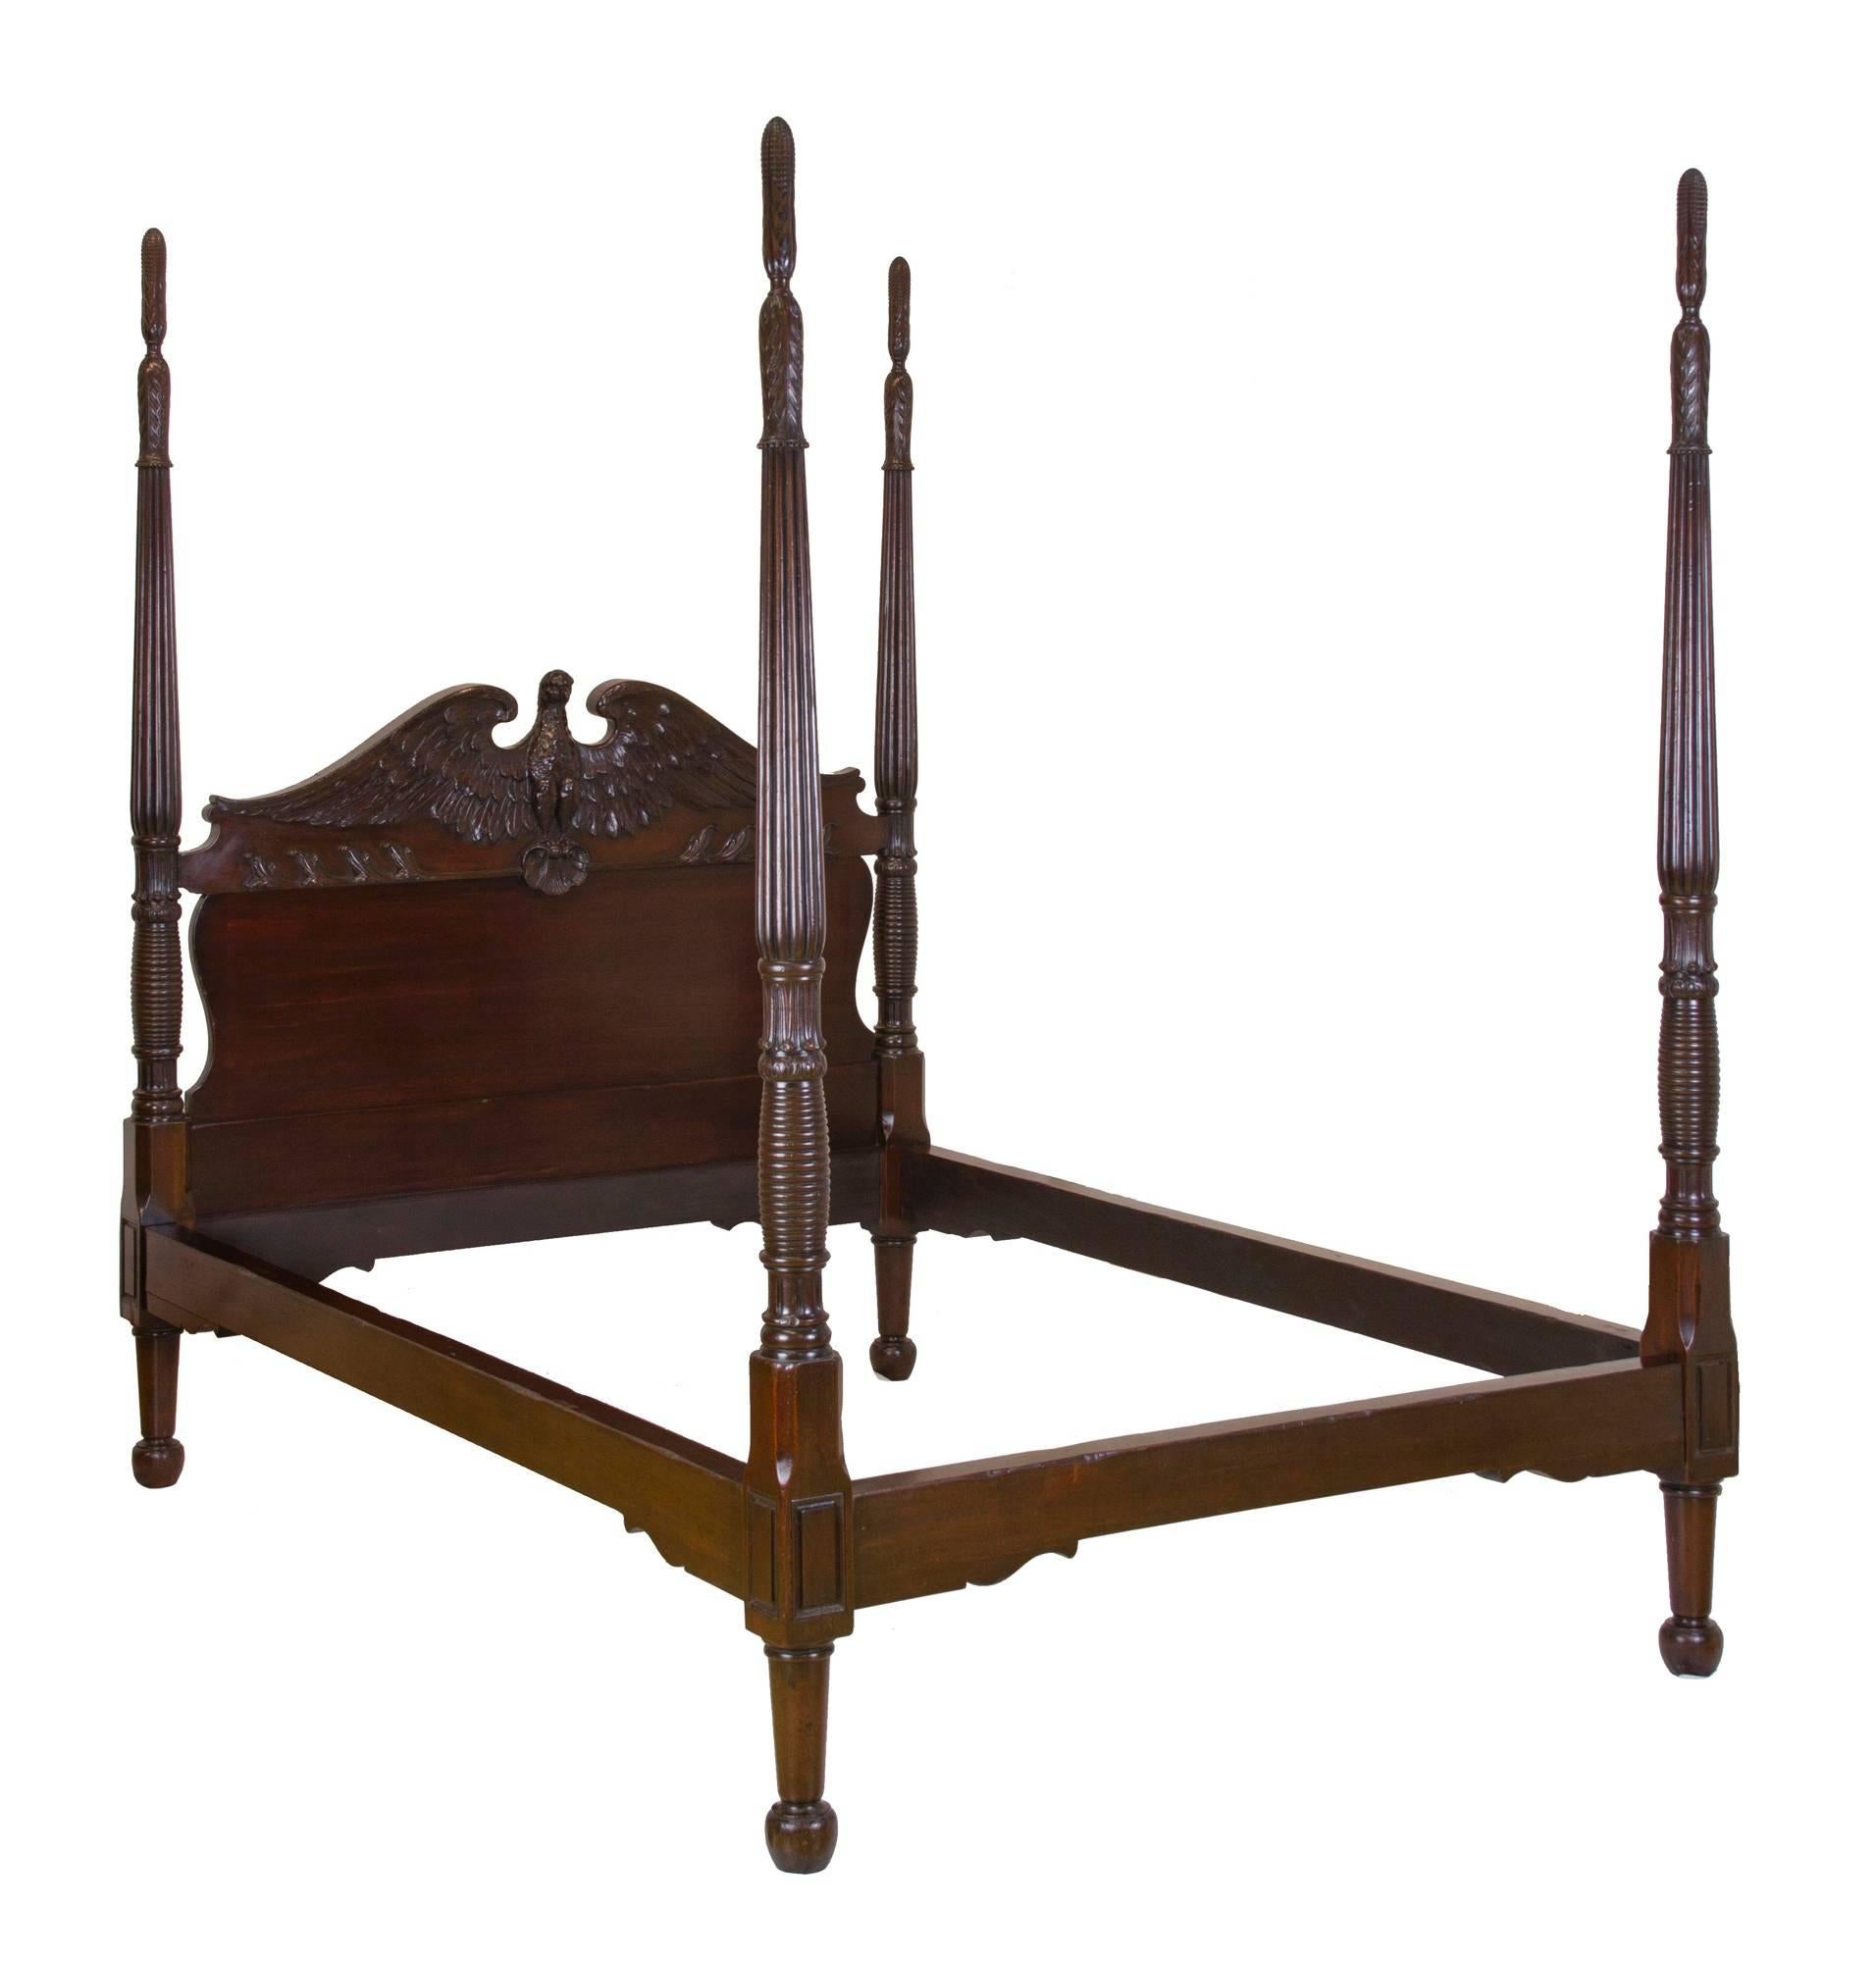 Mid-19th Century Grand Mahogany Classical Bed with Eagle Headboard, Southern, circa 1830-1840 For Sale